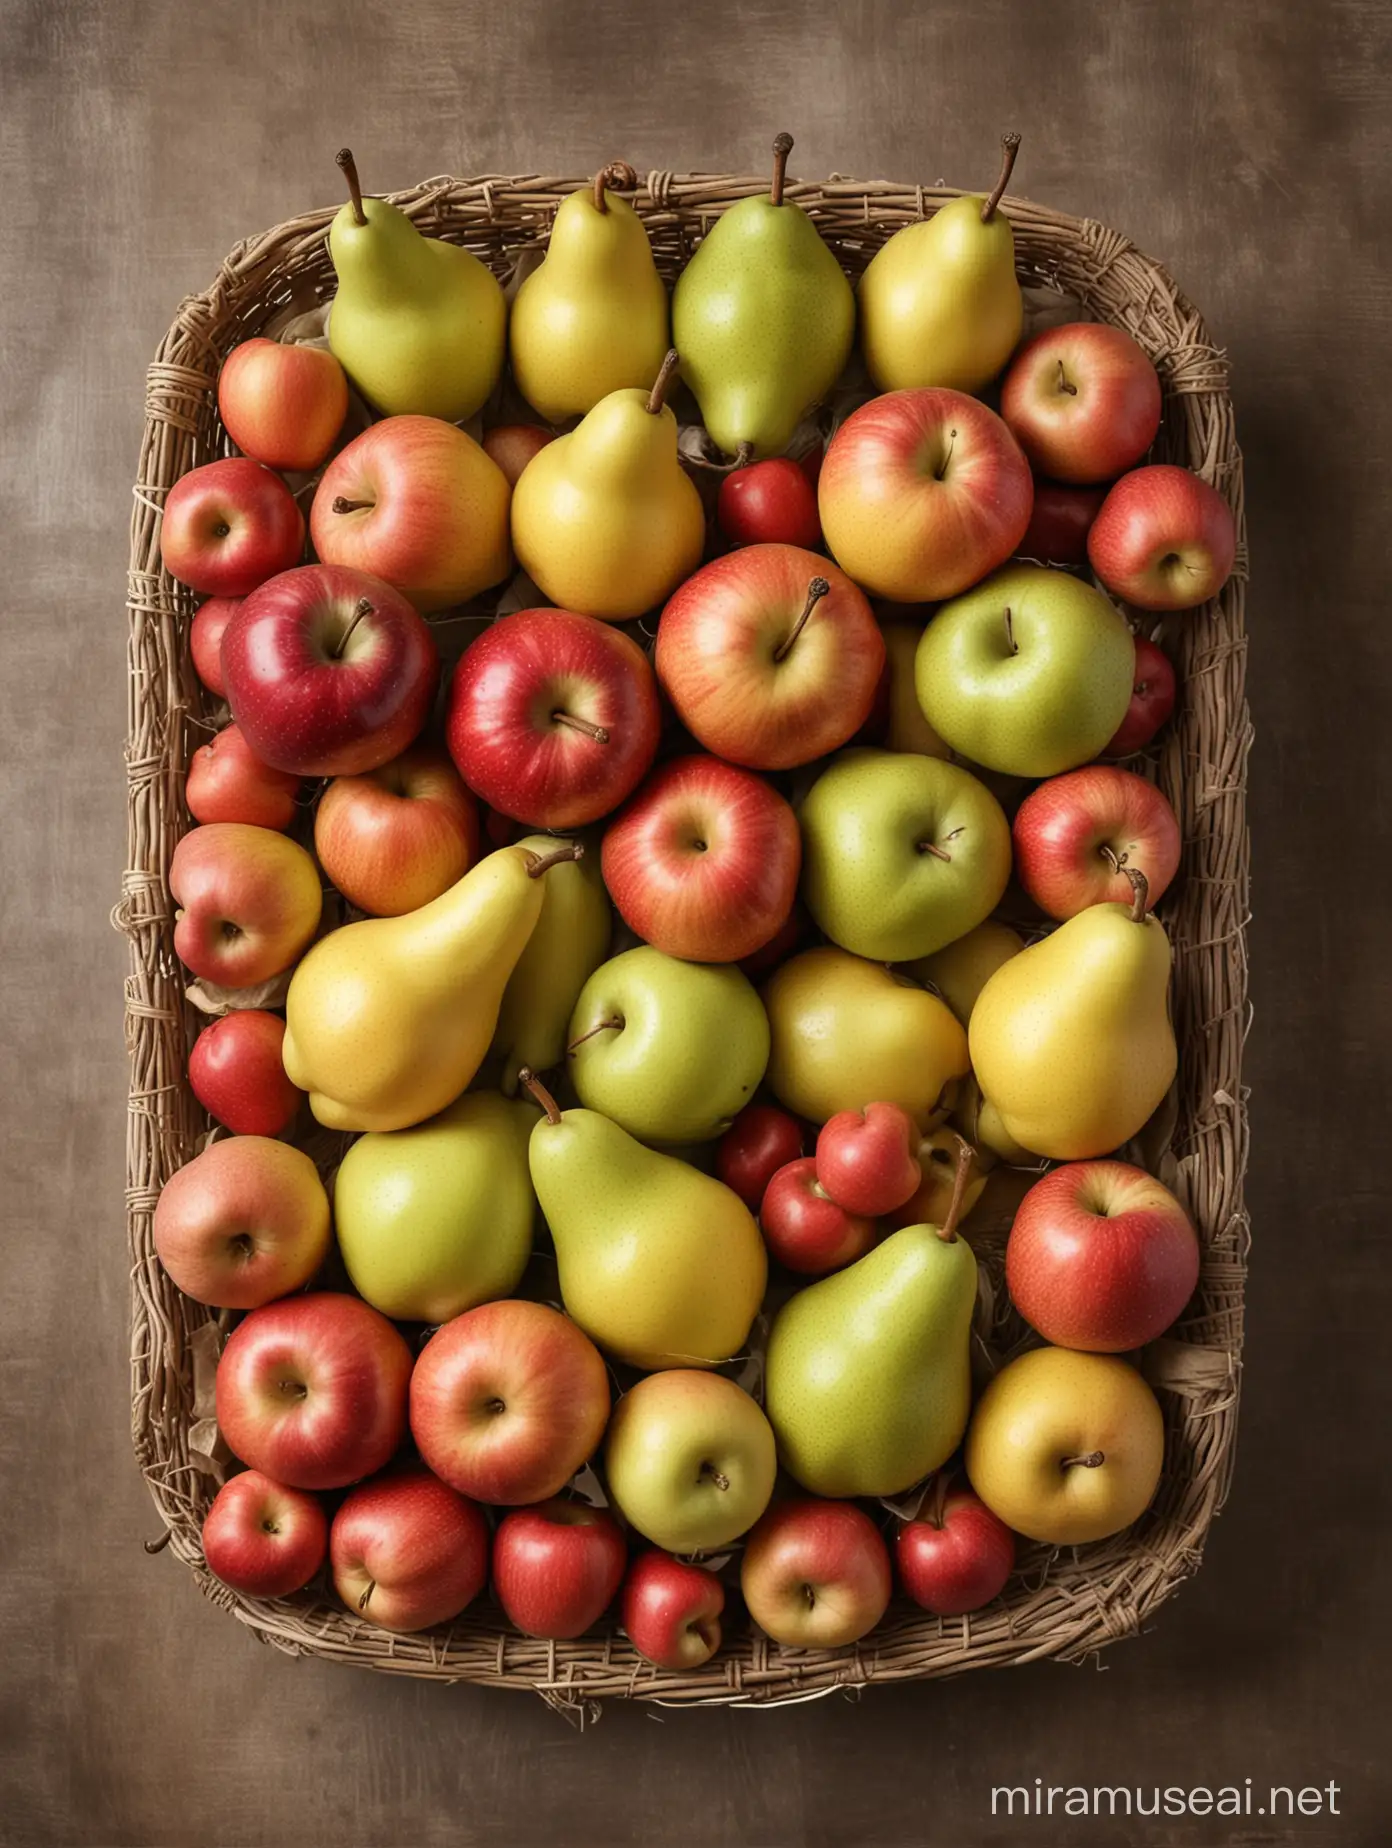 Pears and apples on the side, fruit composition, naturalistic , fruit size fixed, photo